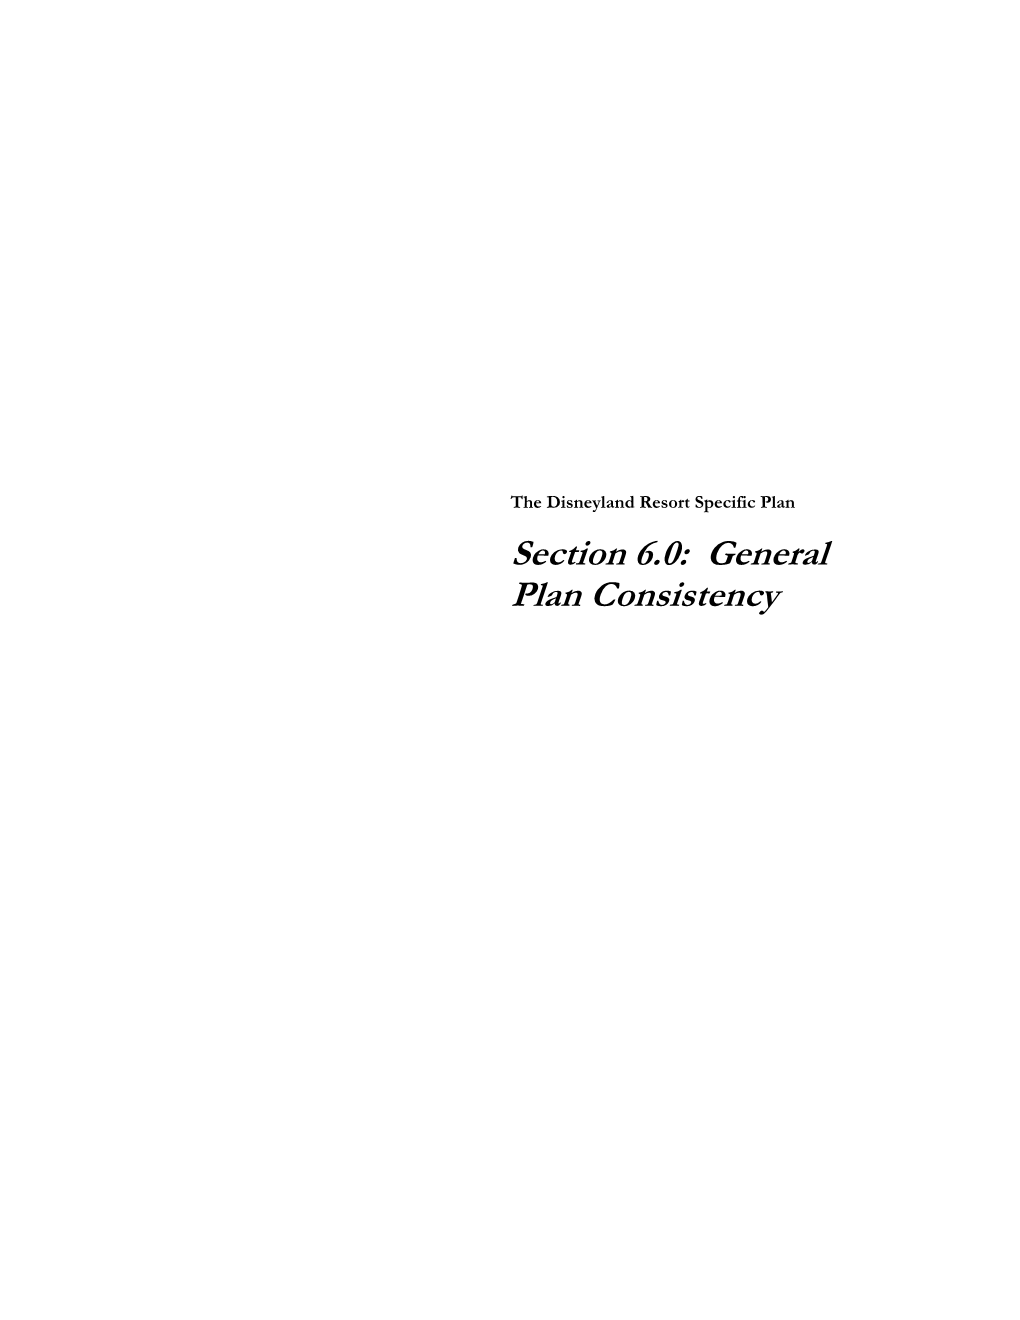 Section 6.0: General Plan Consistency